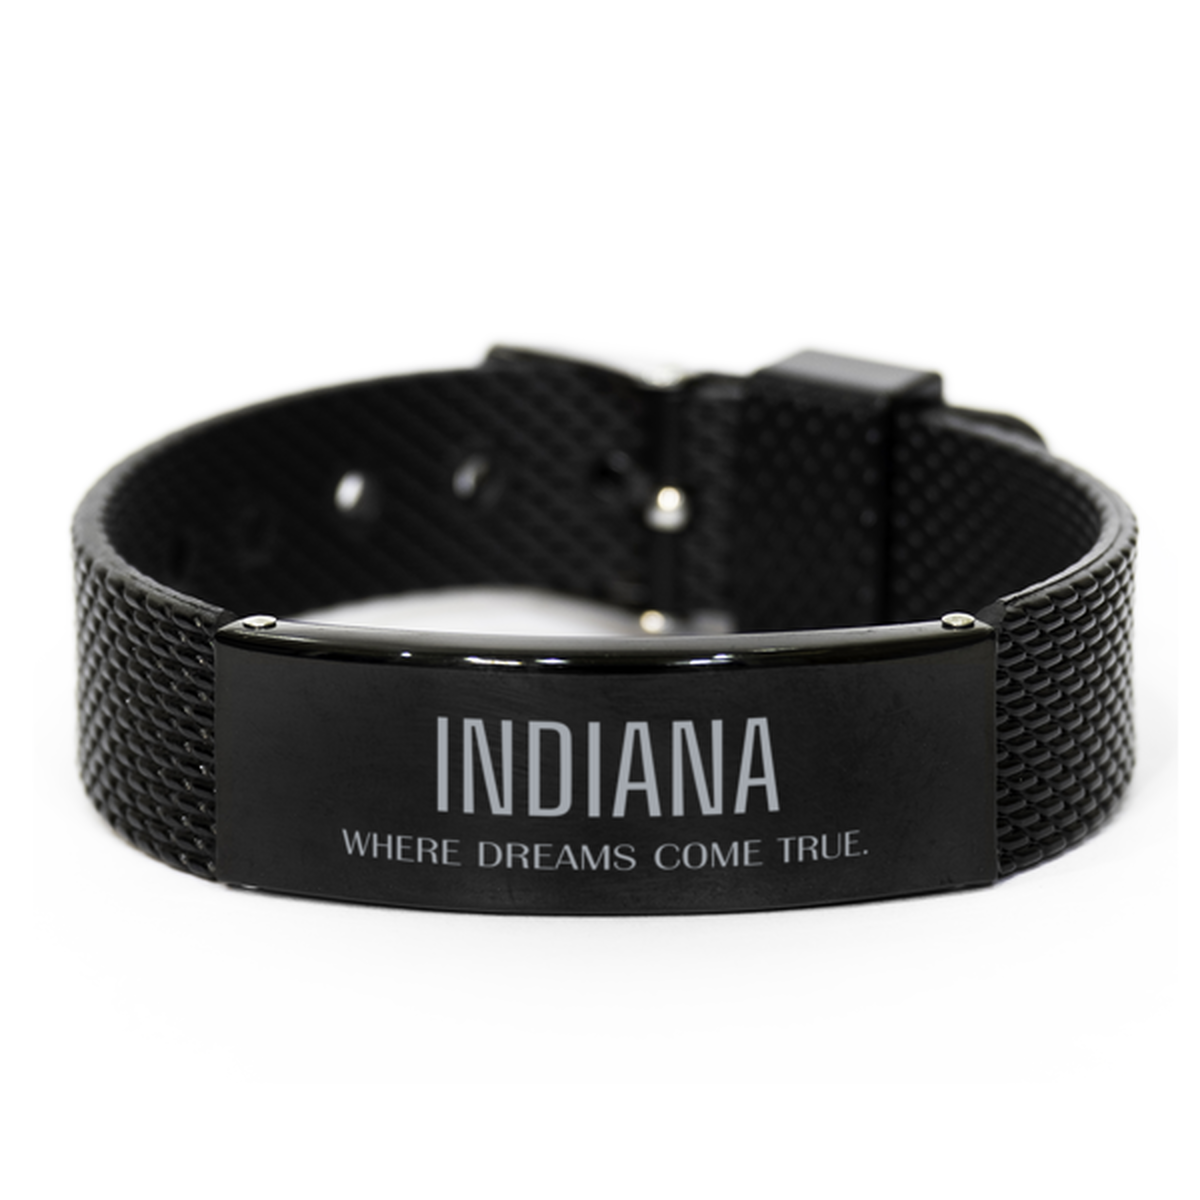 Love Indiana State Black Shark Mesh Bracelet, Indiana Where dreams come true, Birthday Inspirational Gifts For Indiana Men, Women, Friends